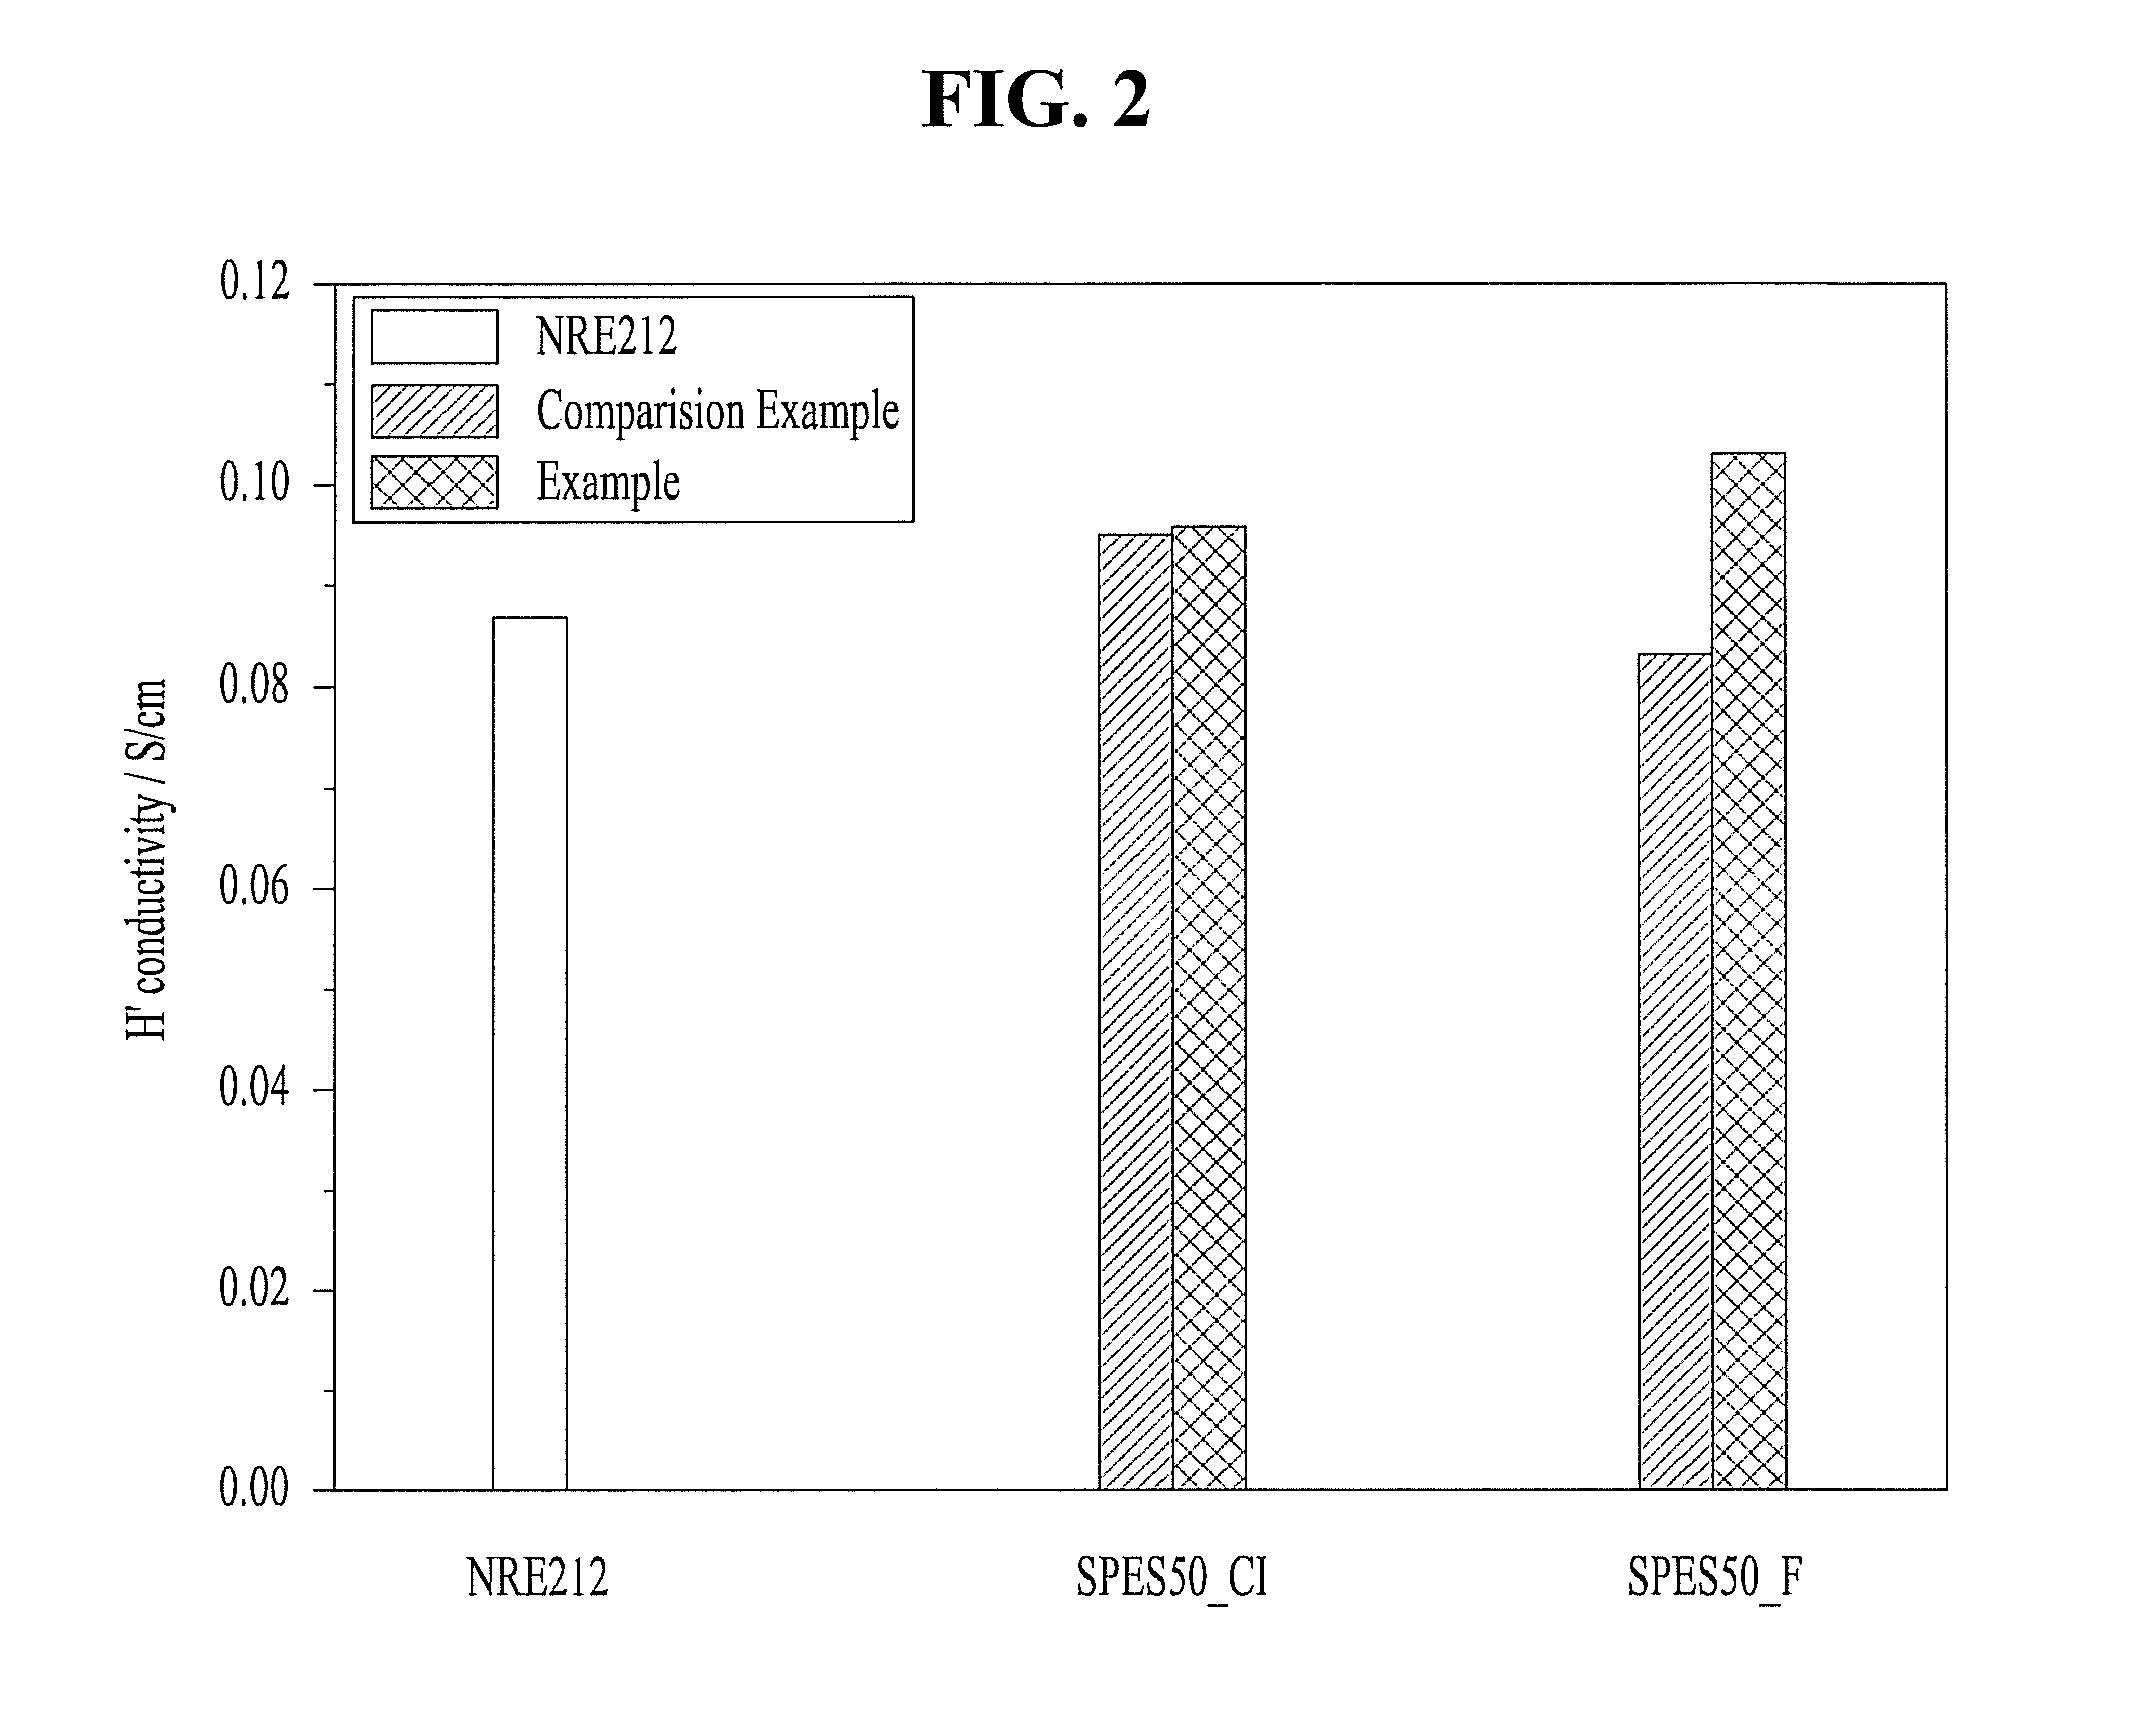 Method for preparing a sulfonated polyarylene ether sulfone copolymer for fuel cells